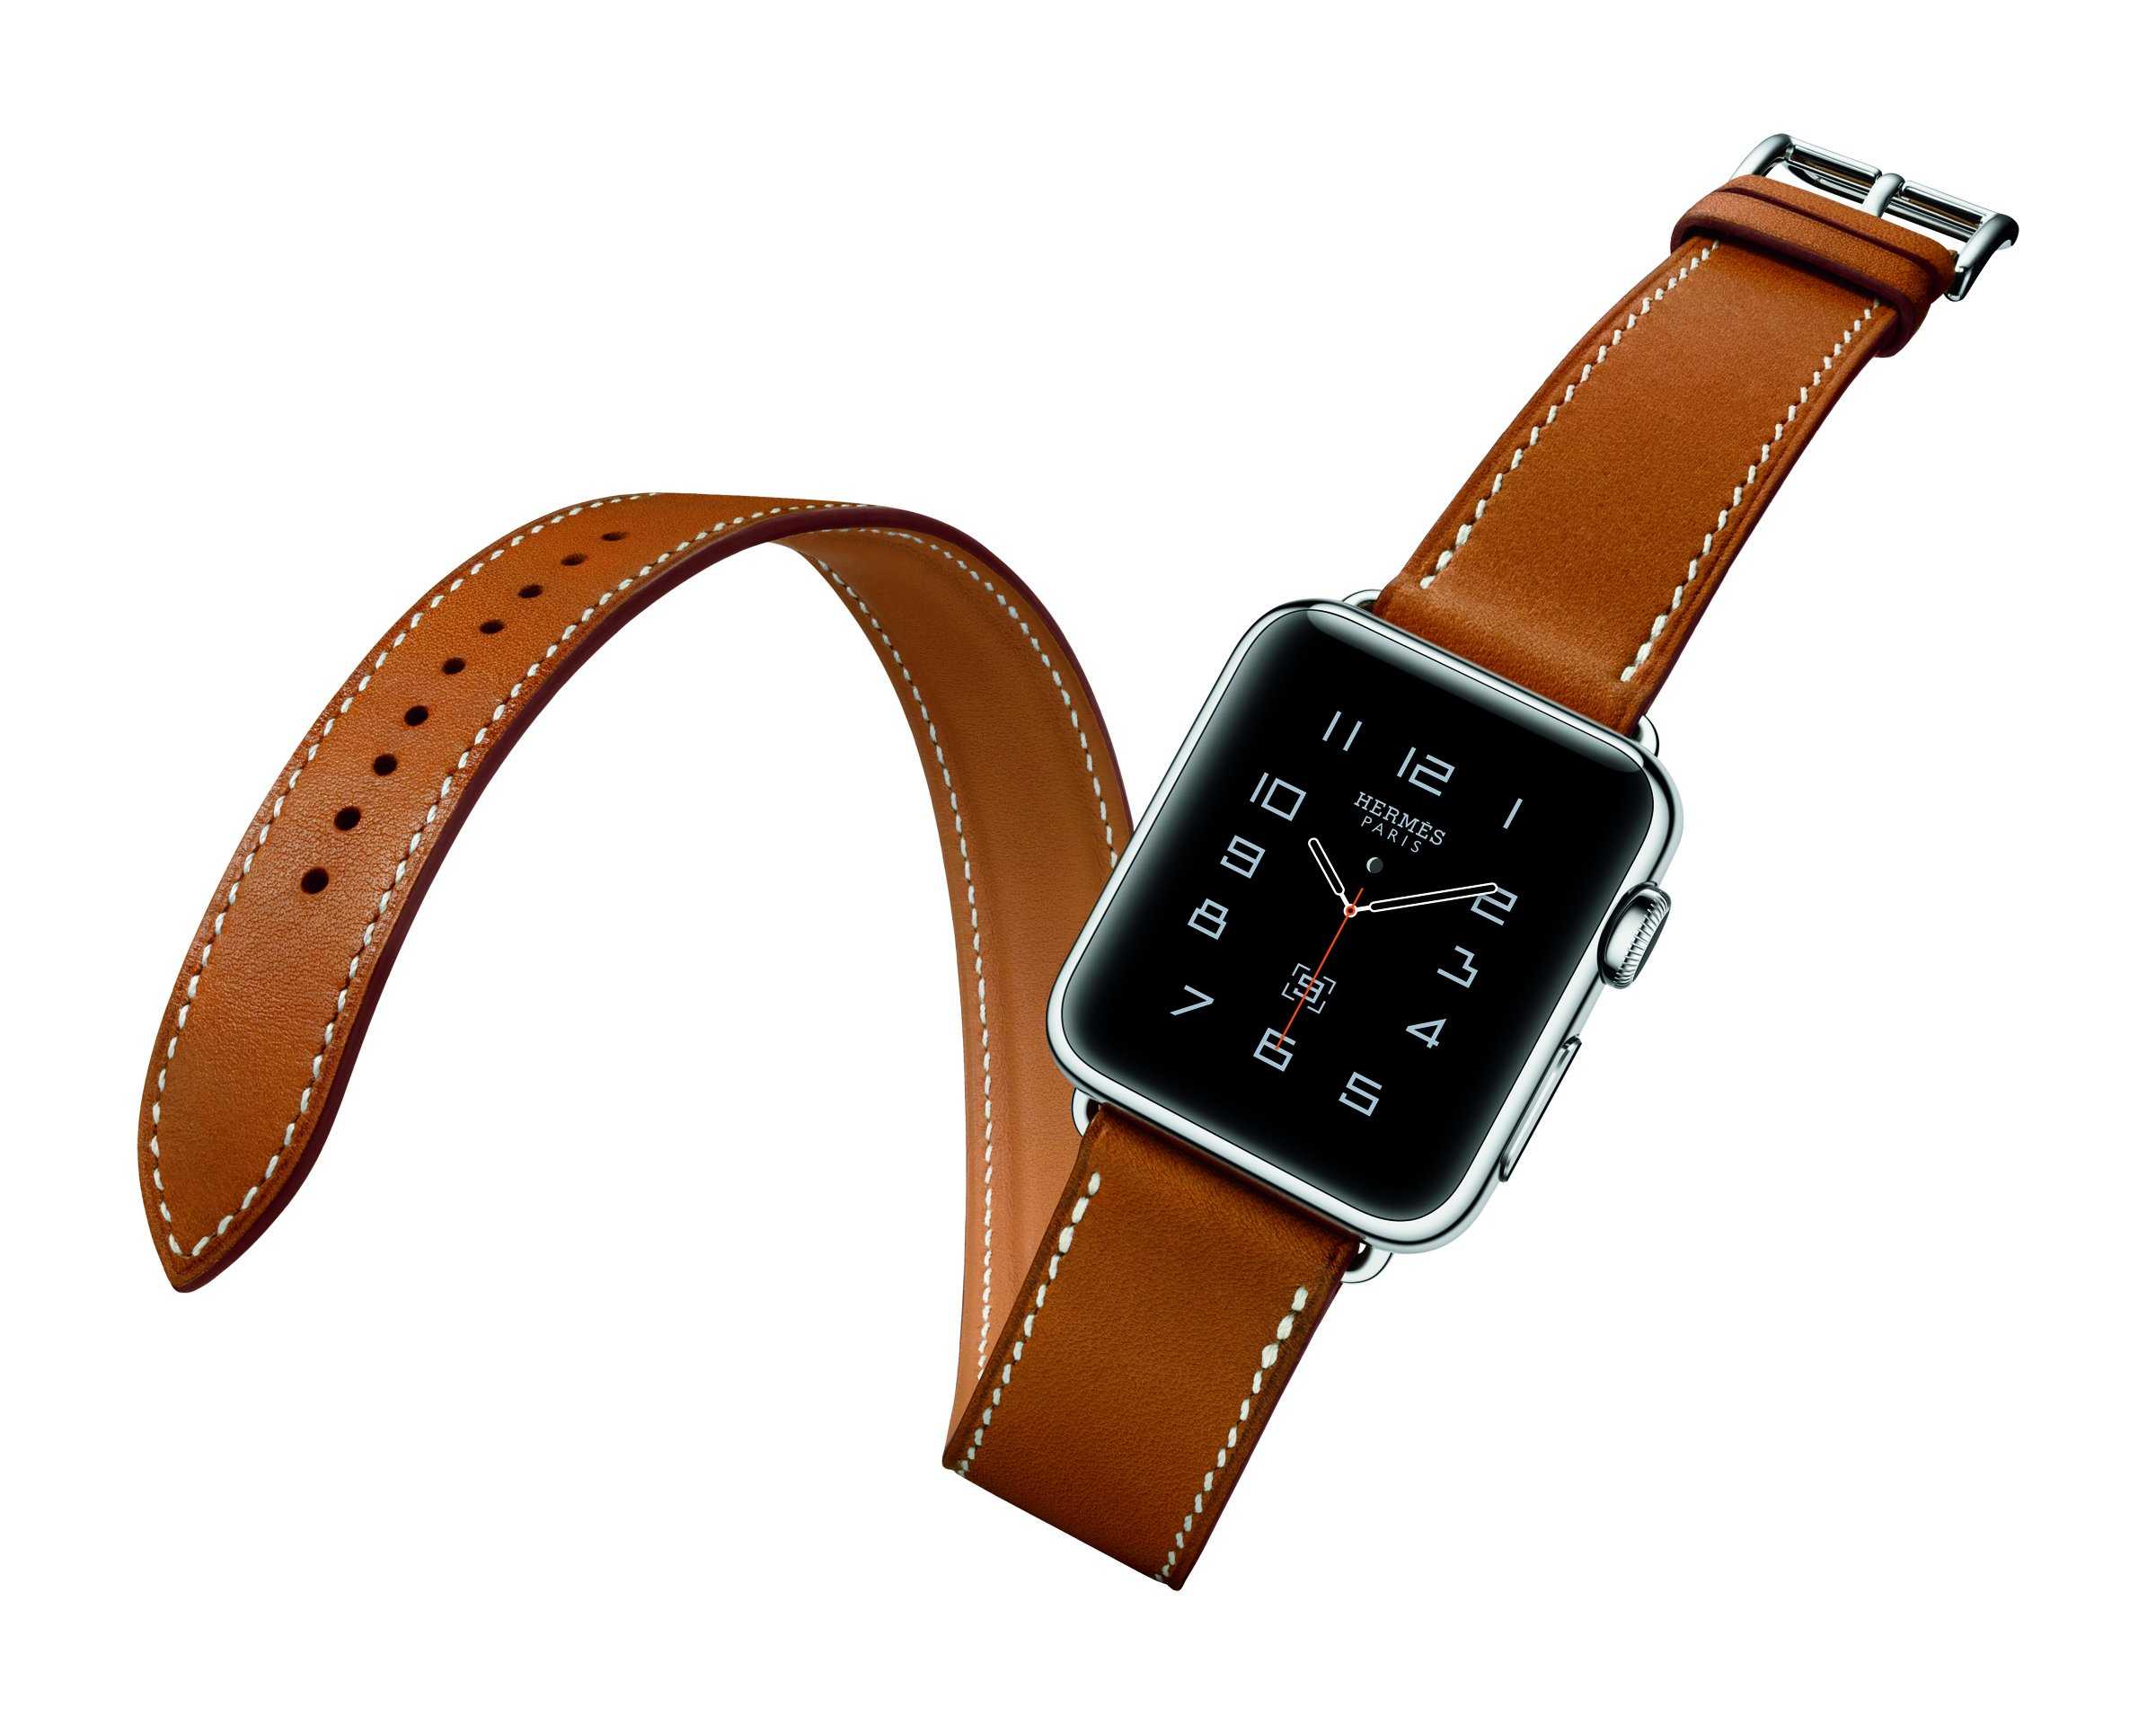 Hermes Apple Watch bands are now available on their own.